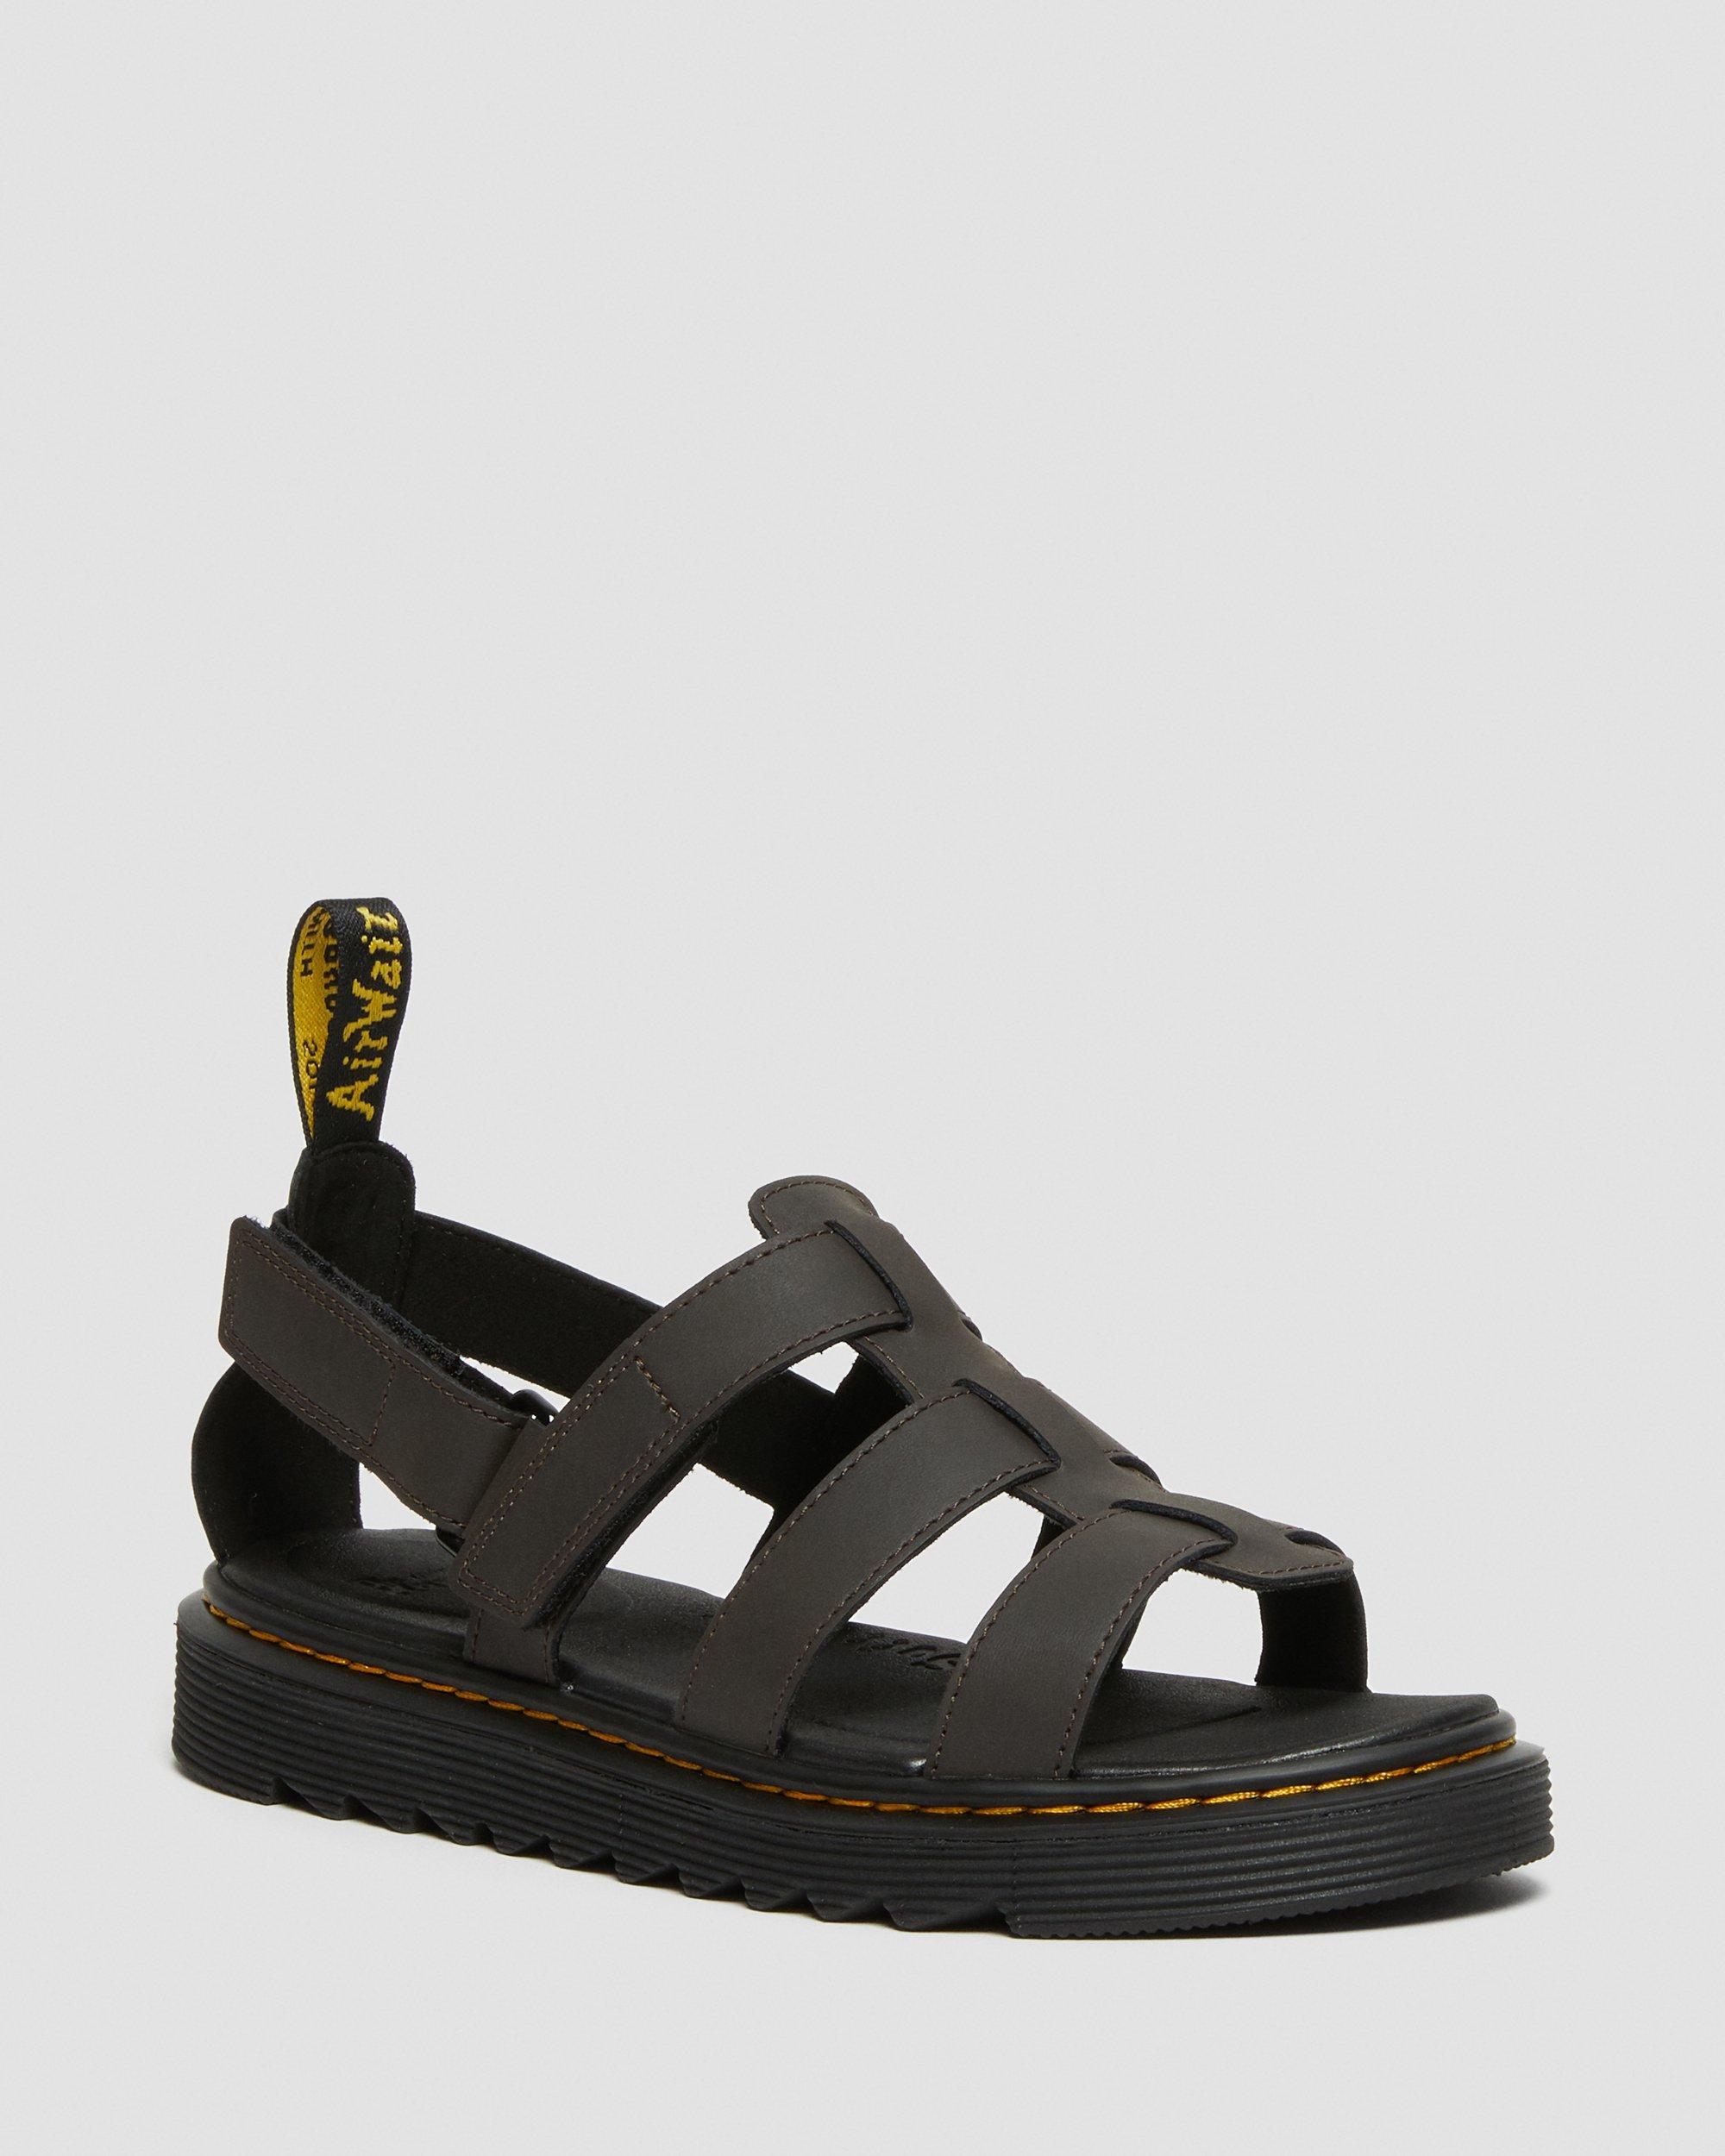 YOUTH TERRY LEATHER STRAP SANDALS | Dr. Martens Official